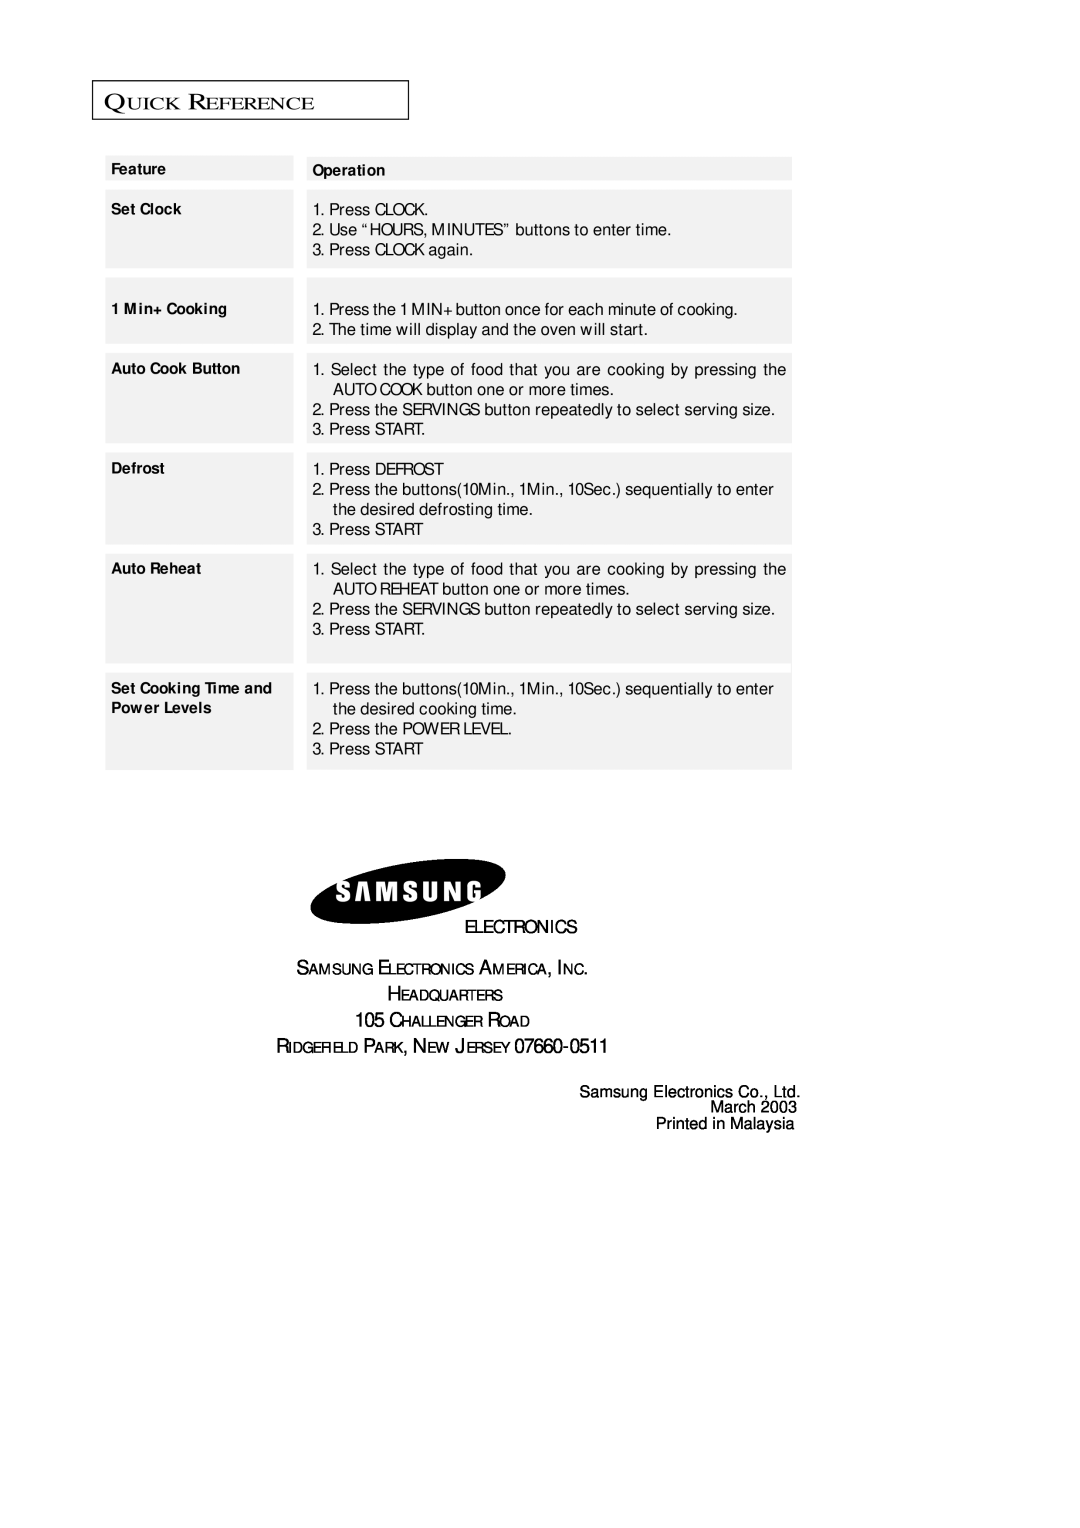 Samsung MW4699S Electronics, Feature, Operation, Set Clock, 1 Min+ Cooking, Auto Cook Button, Defrost, Auto Reheat 